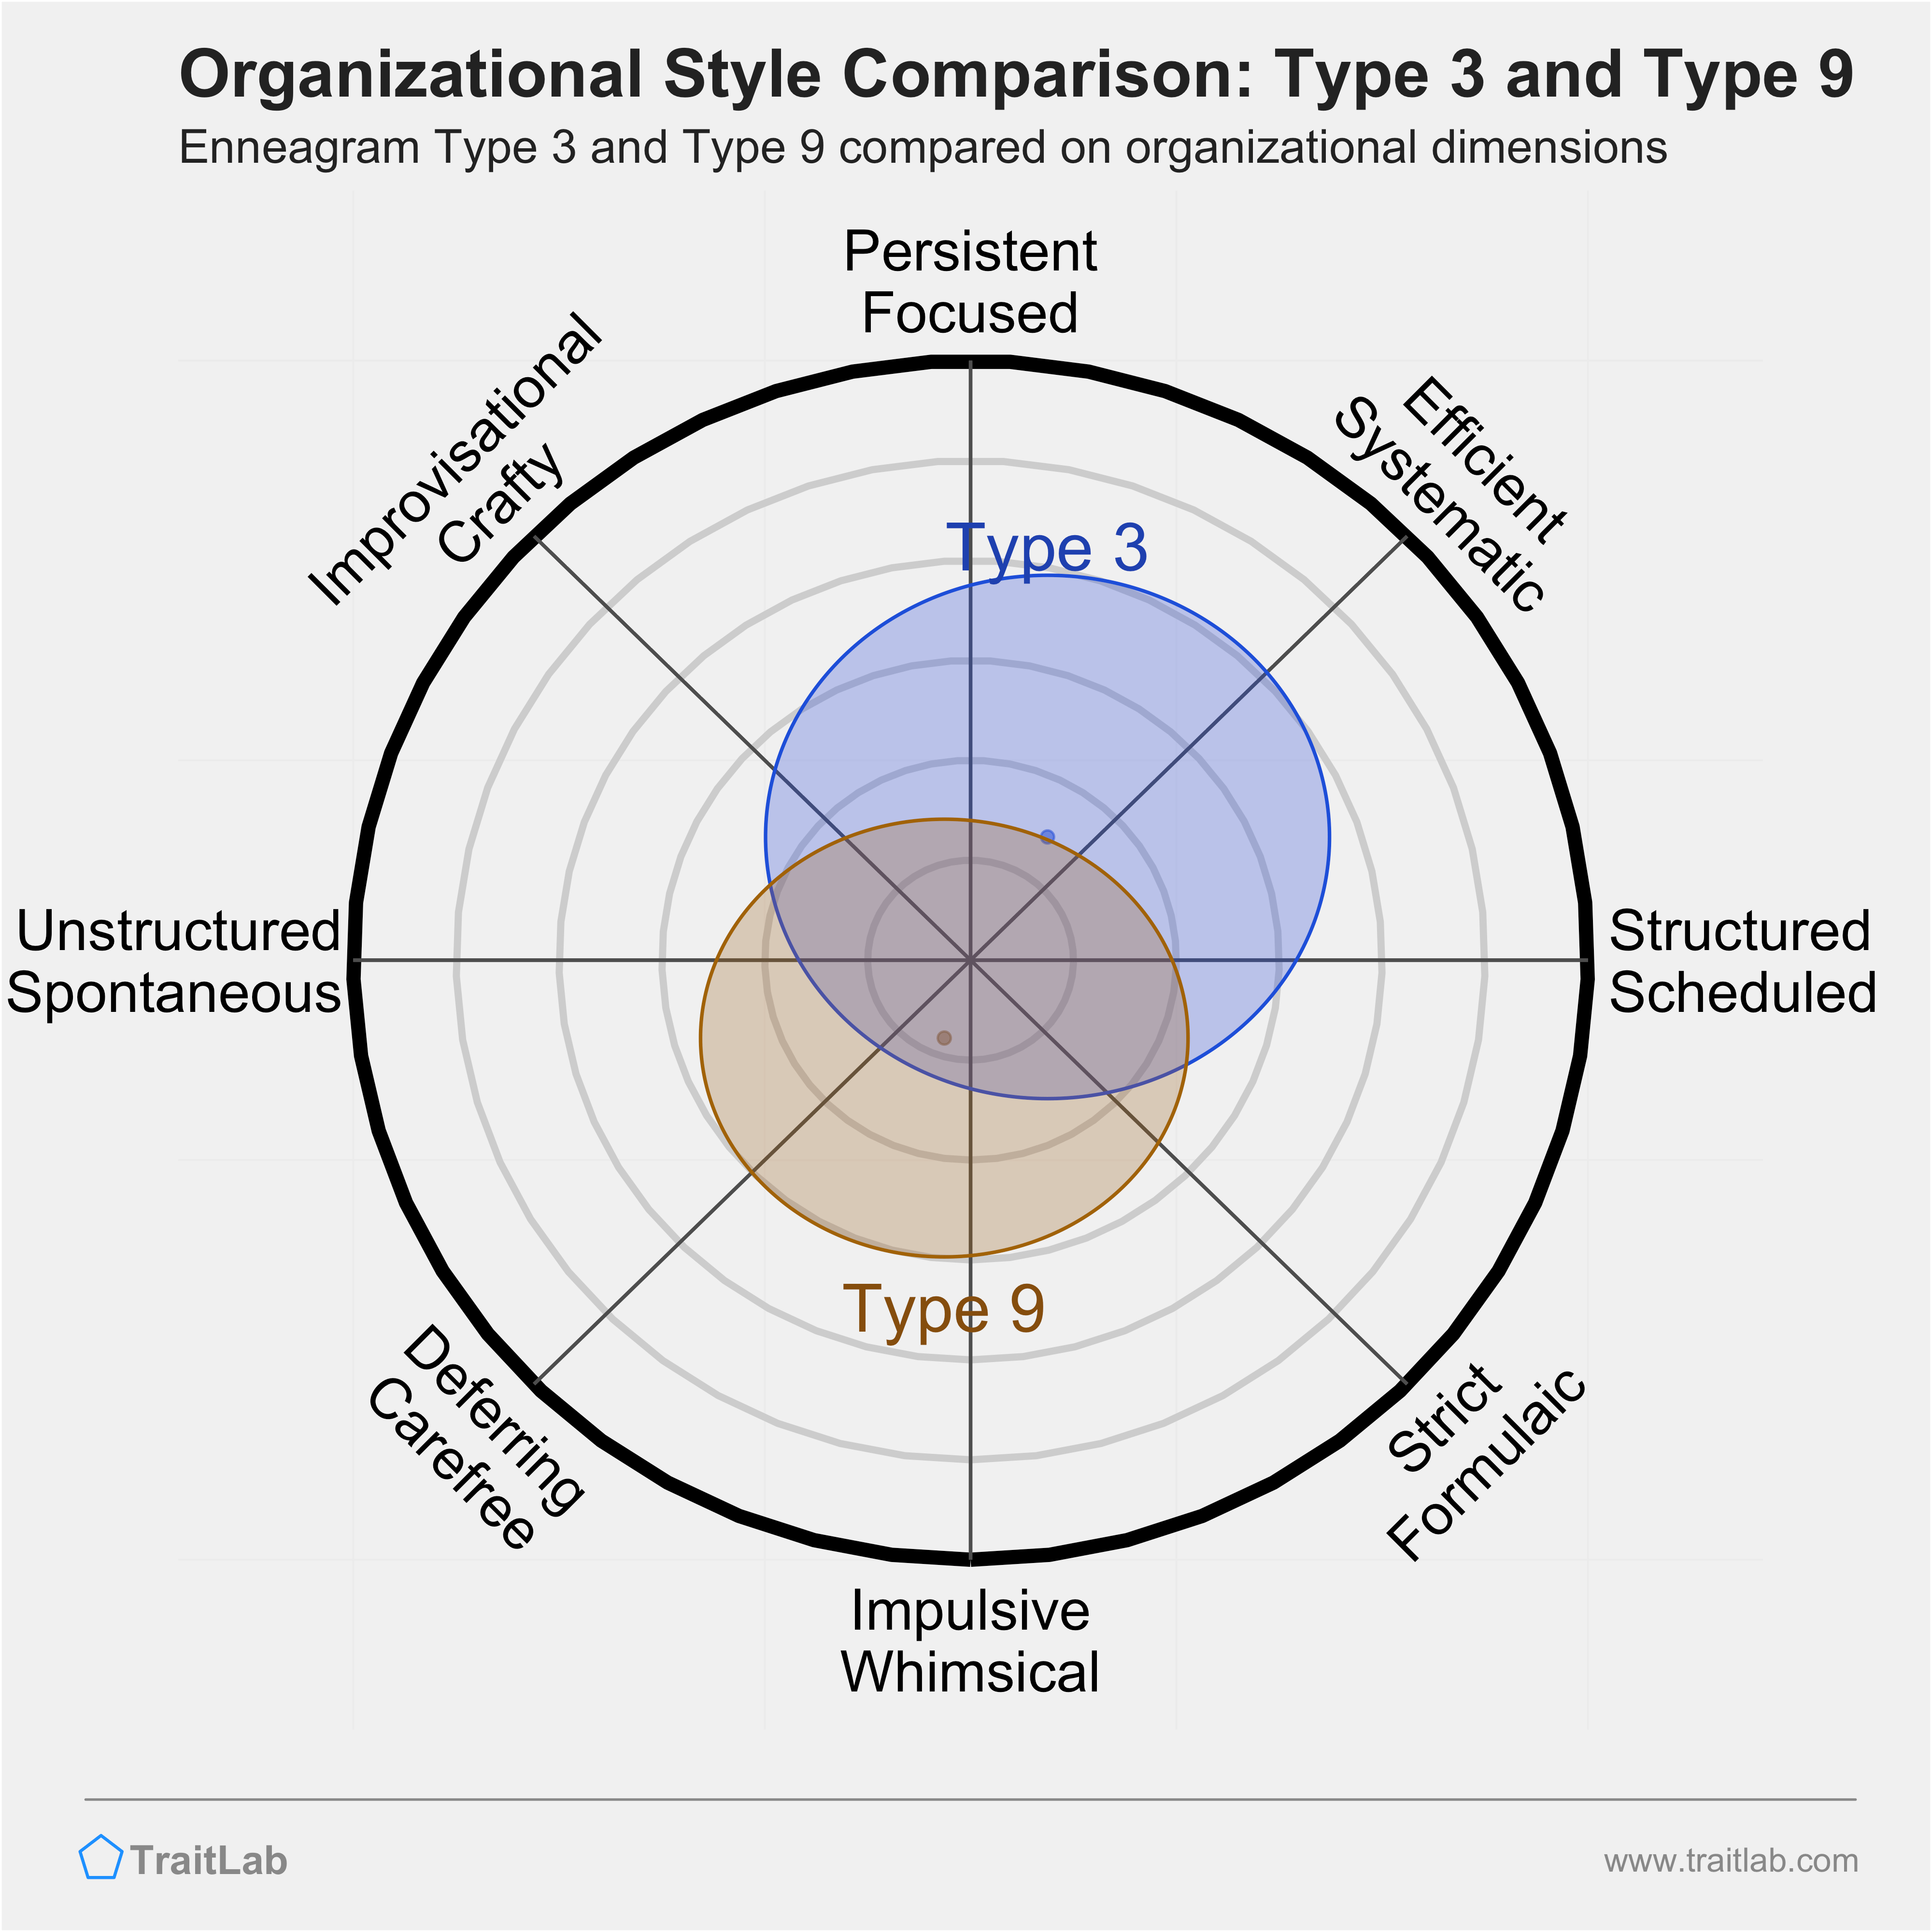 Type 3 and Type 9 comparison across organizational dimensions